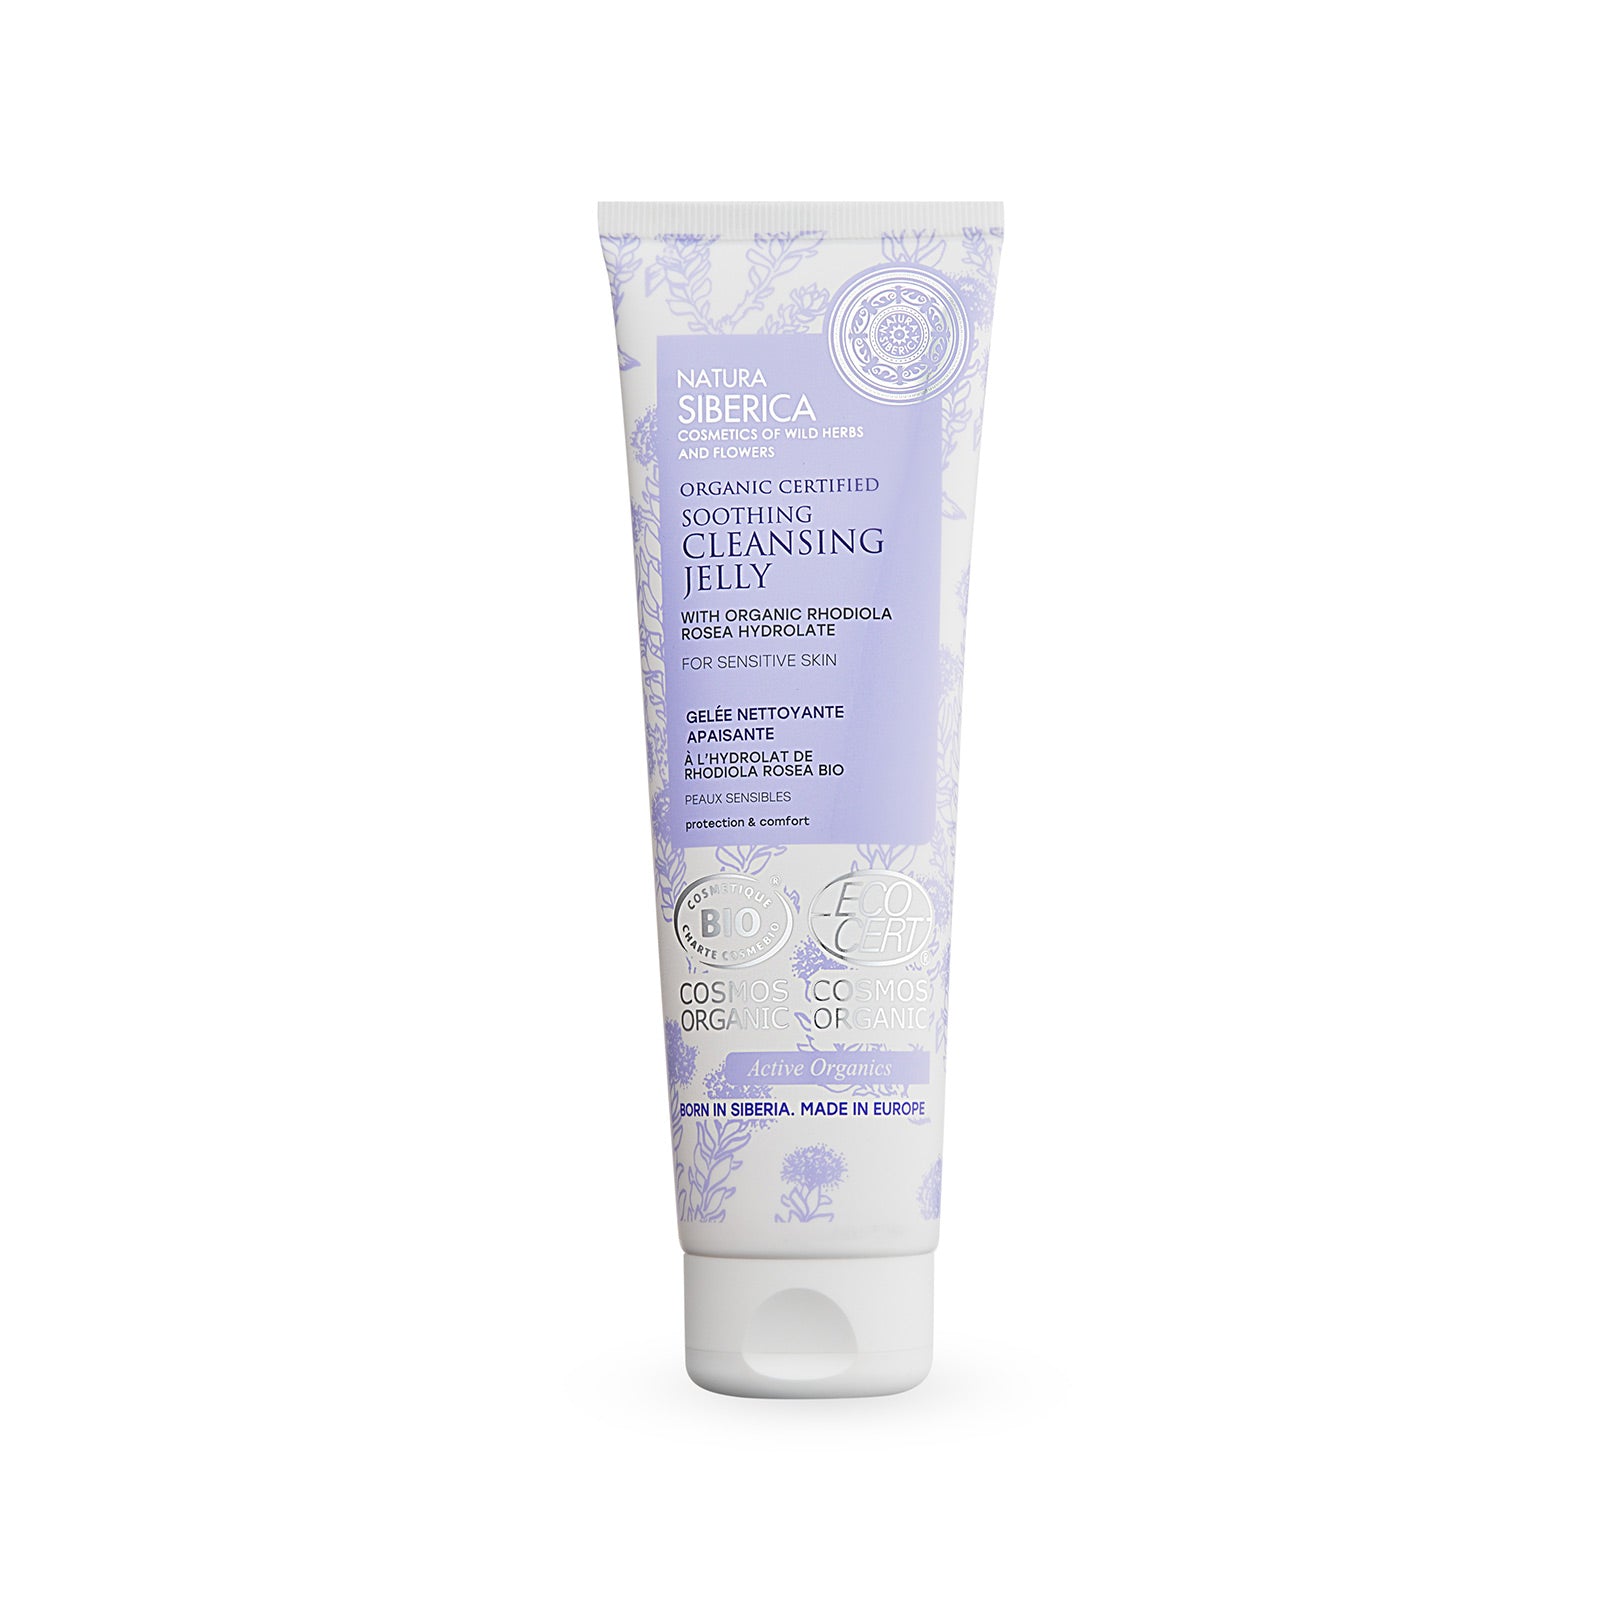 Image of Natura Siberica Organic Certified Soothing cleansing jelly for sensitive skin, 140 ml